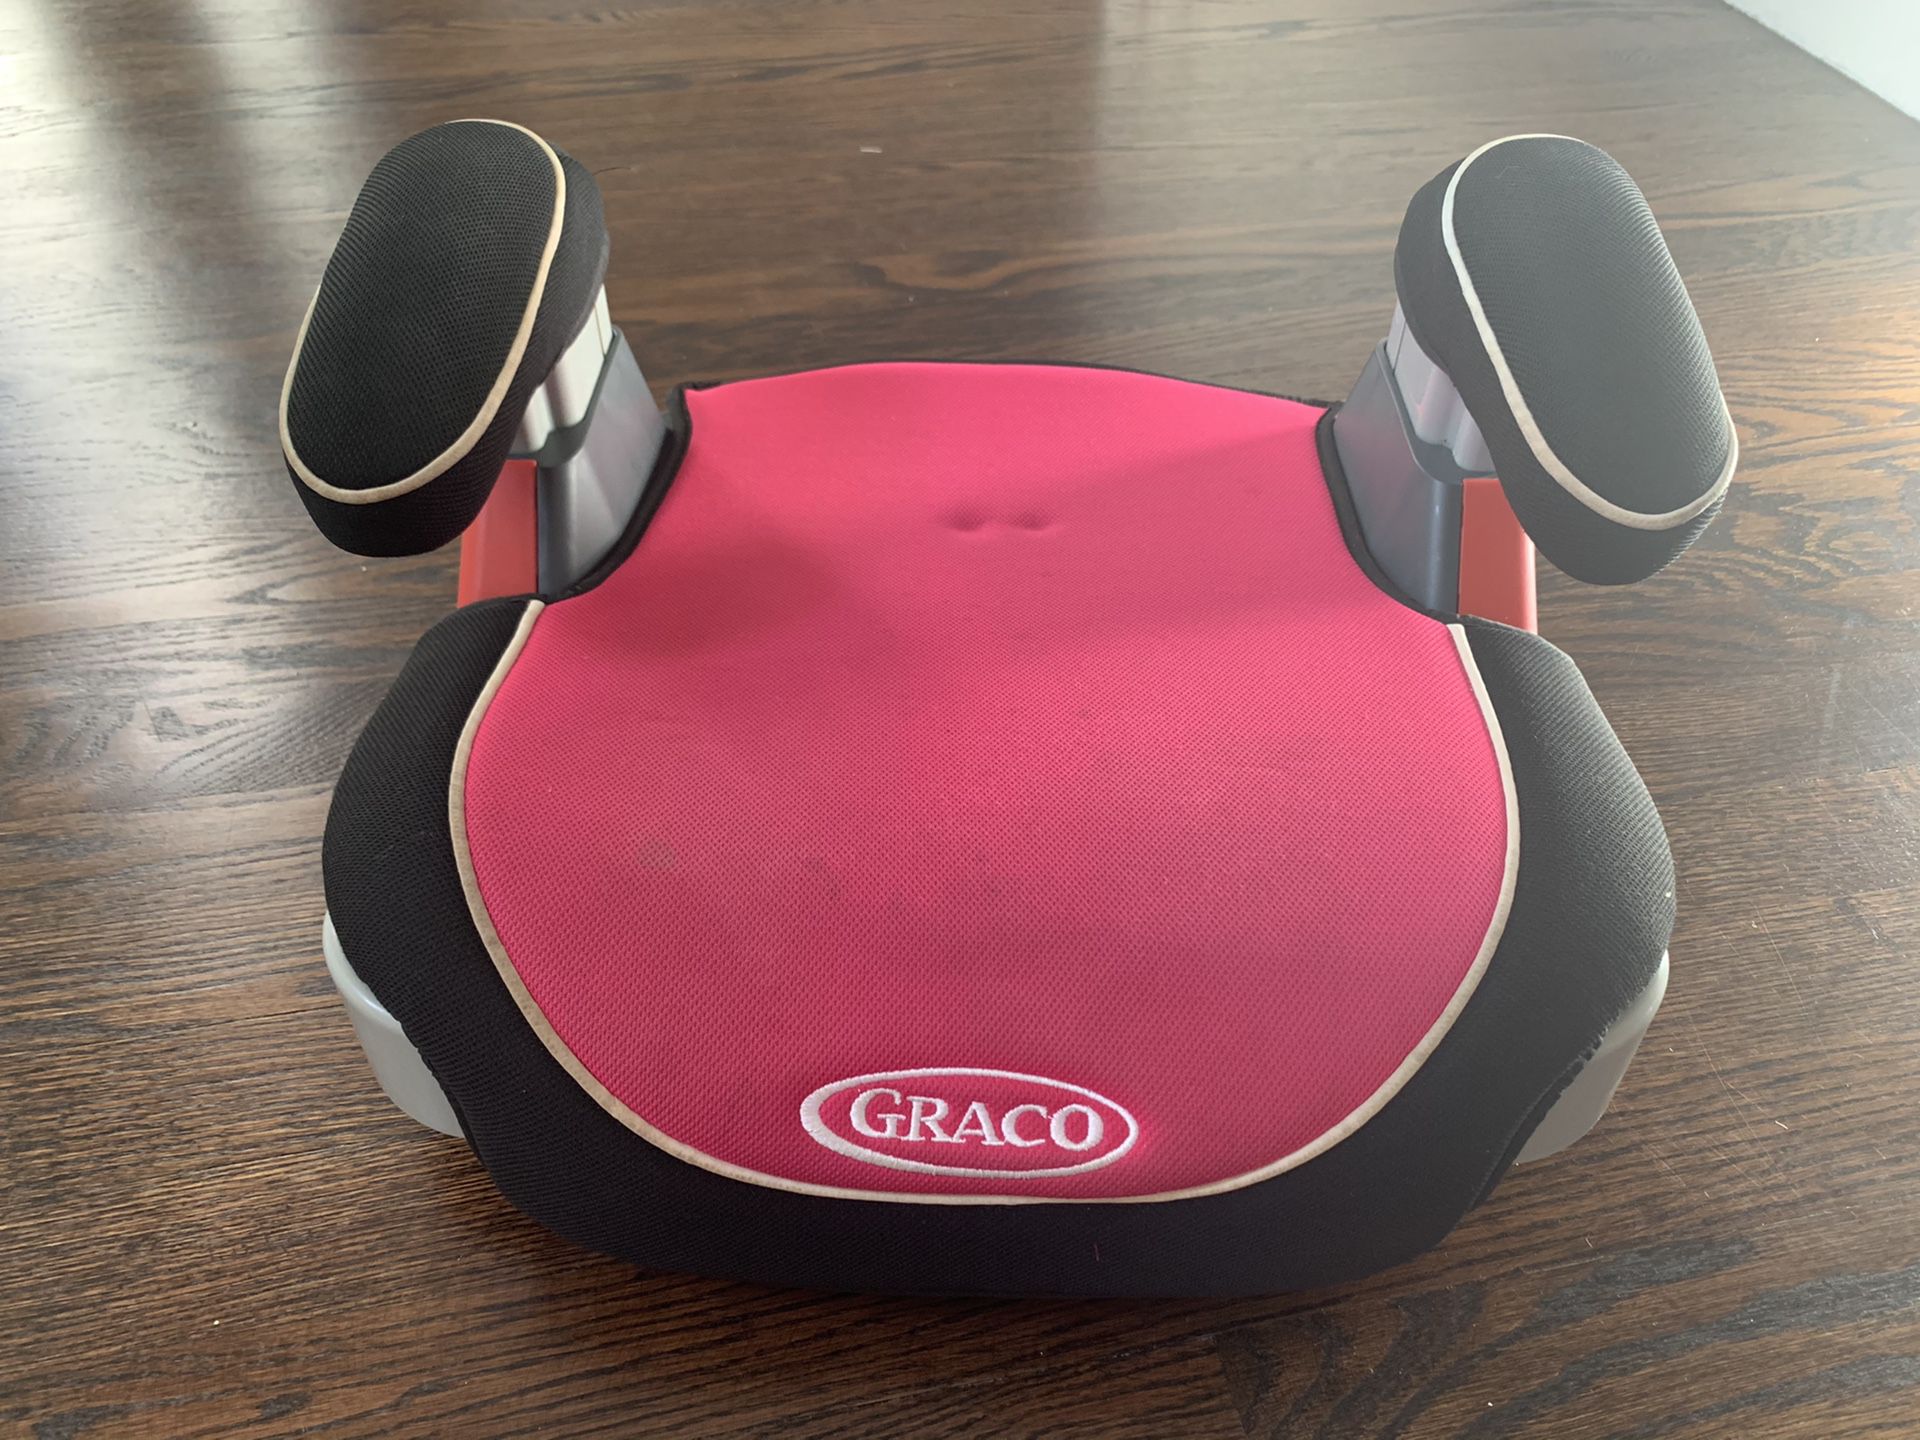 Graco backless car booster seat